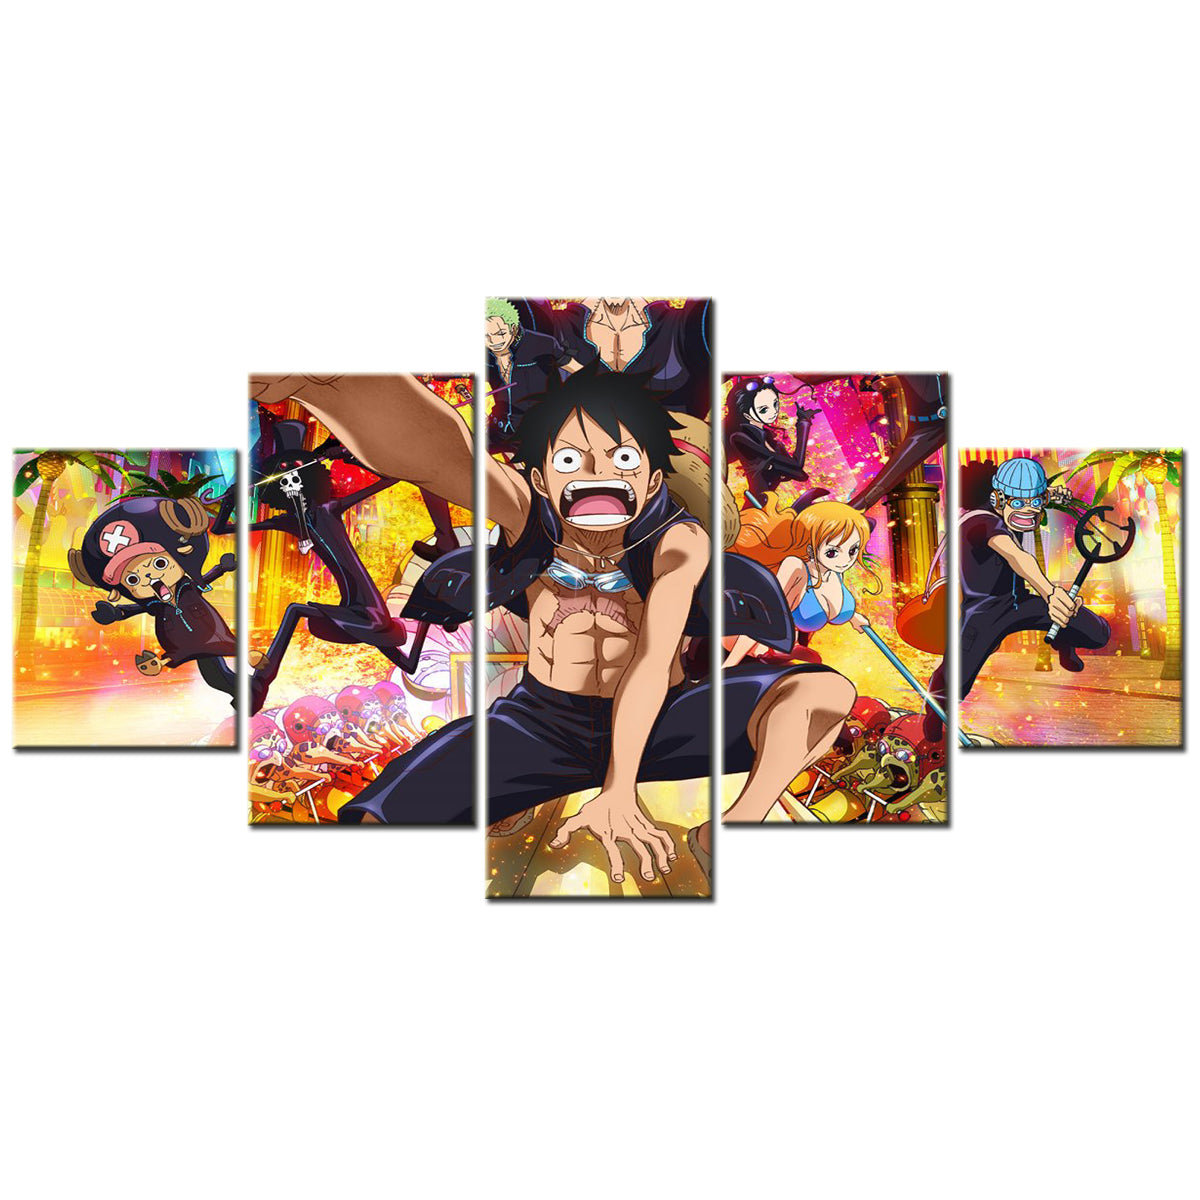 One Piece - 5 Pieces Wall Art - Monkey D. Luffy 12 - Printed Wall Pictures Home Decor - One Piece Poster - One Piece Canvas